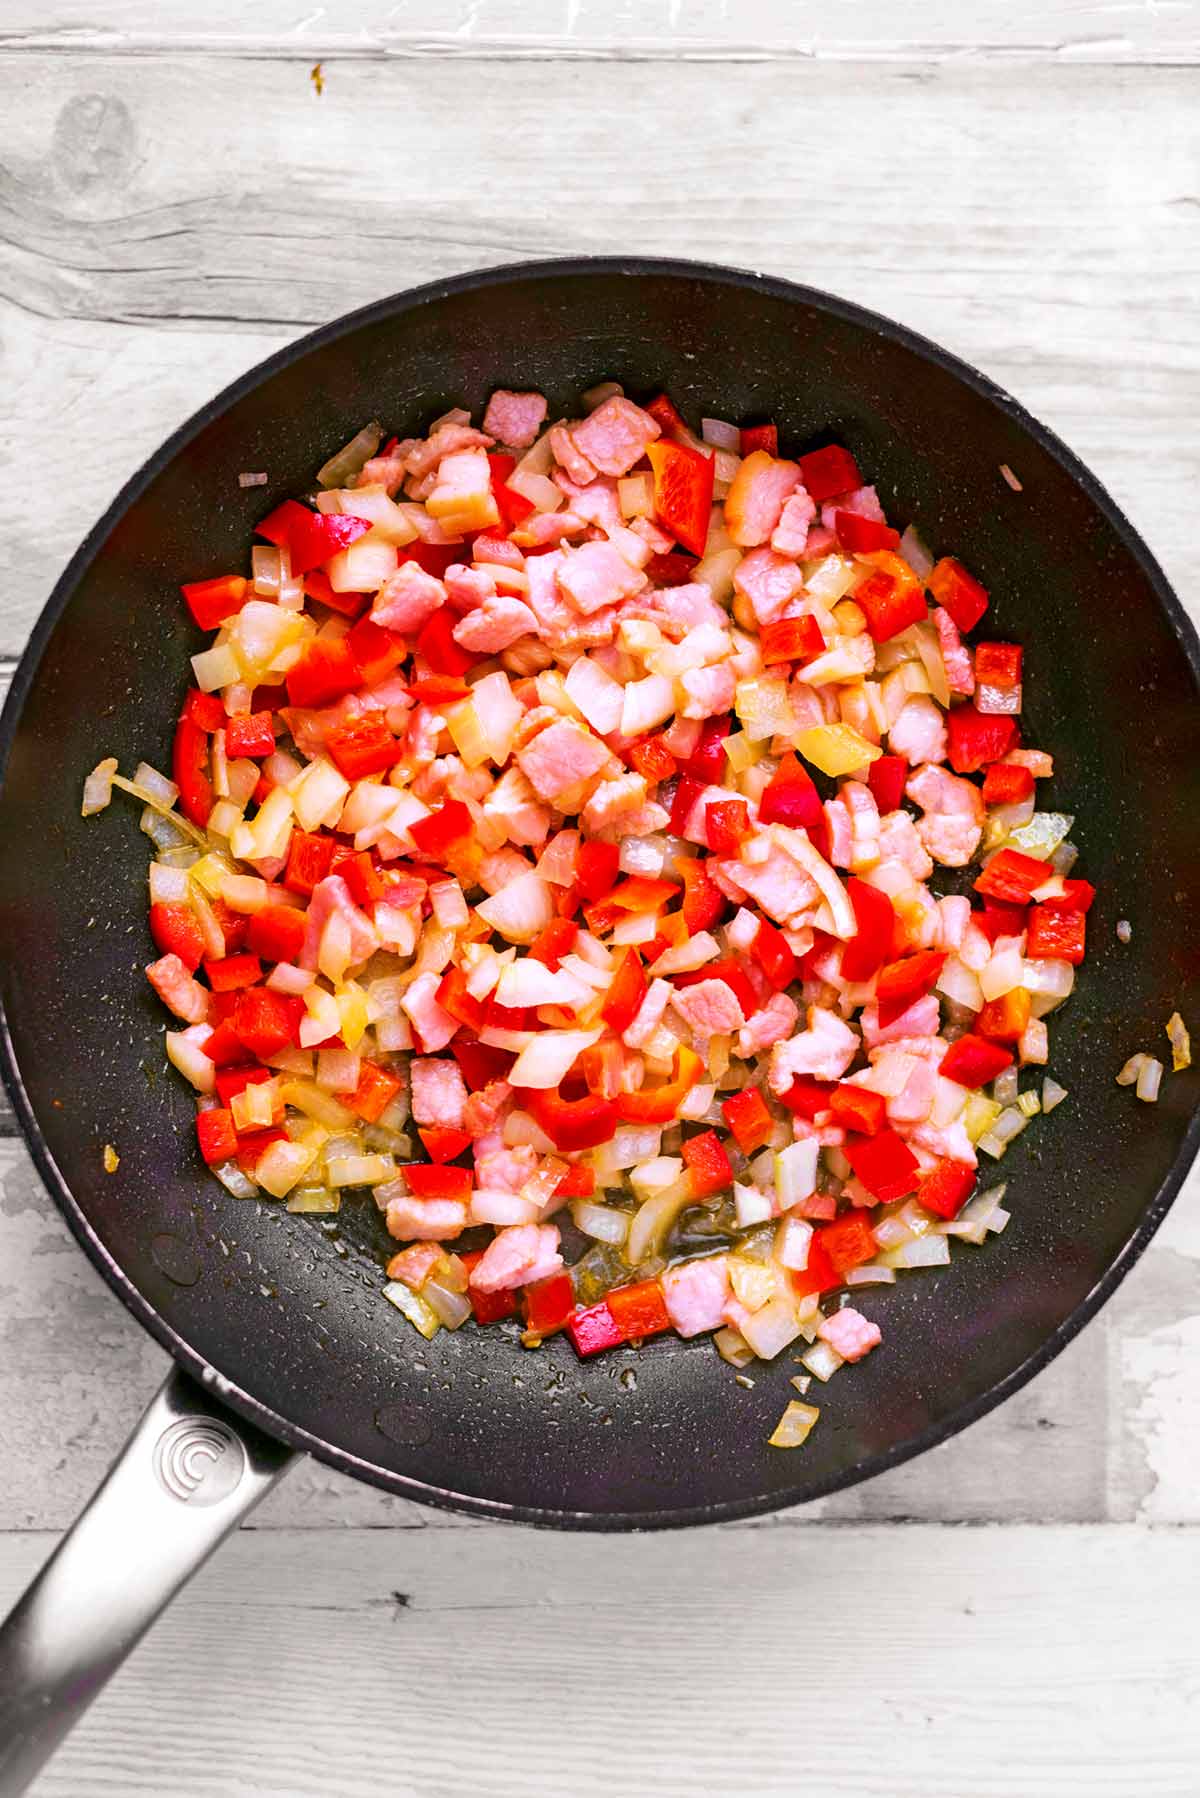 A frying pan with onion, red pepper and bacon cooking in it.